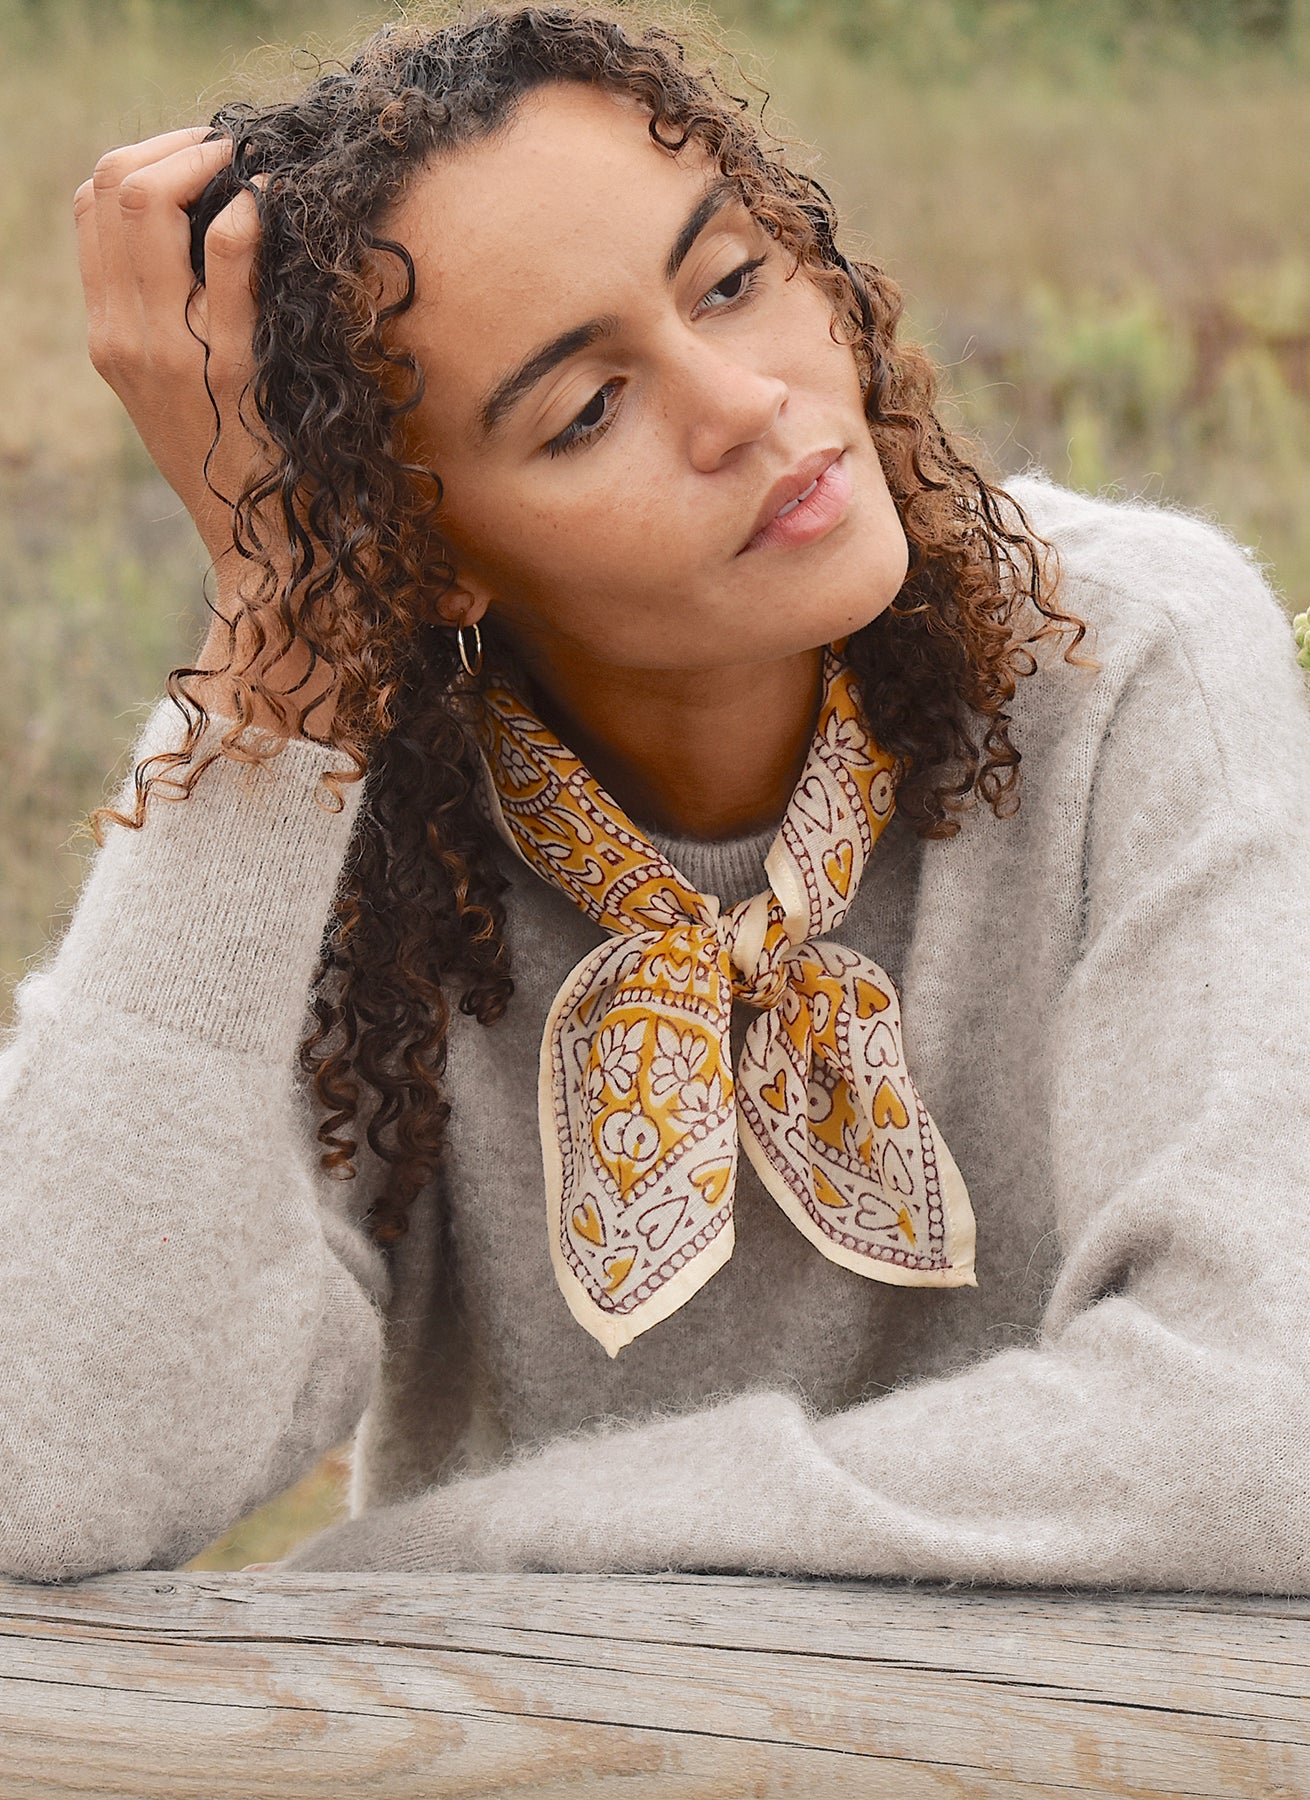 Woman in tan sweater wearing block print yellow and white Suki Bandana around her neck. Woman leaning against a wooden fence with field/grass in the background.